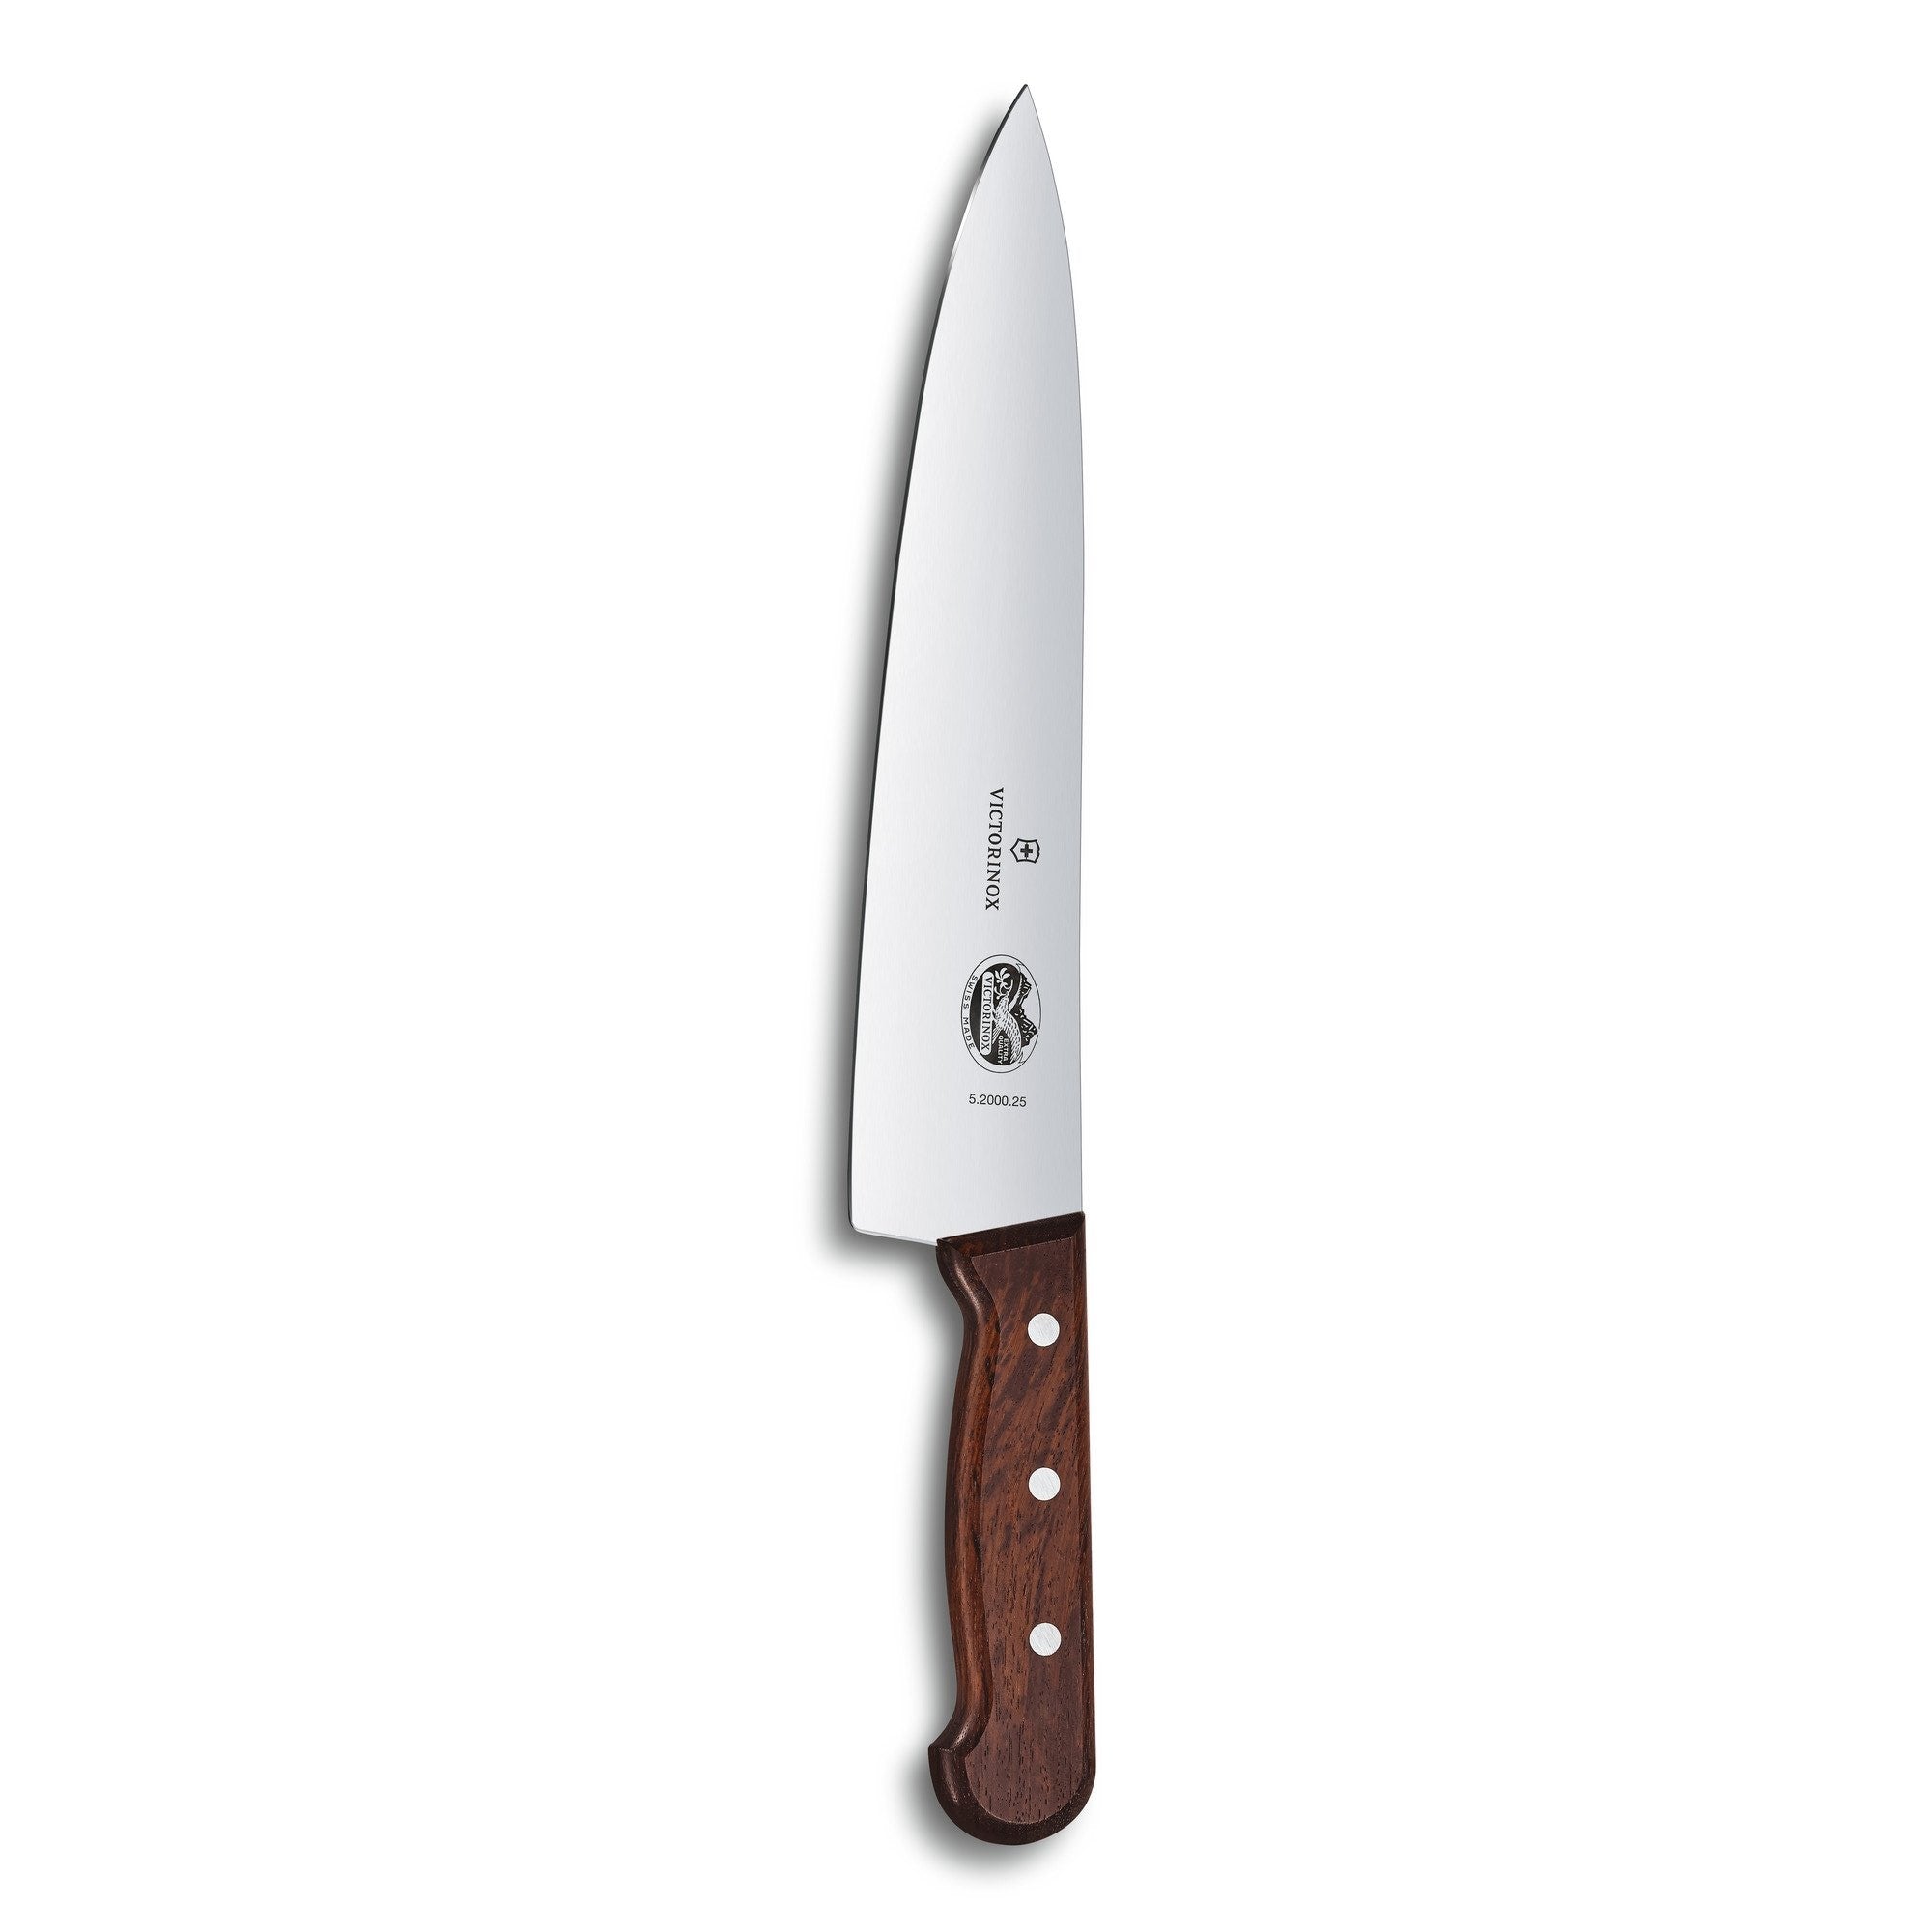 Victorinox Rosewood 10" Chef's Knife